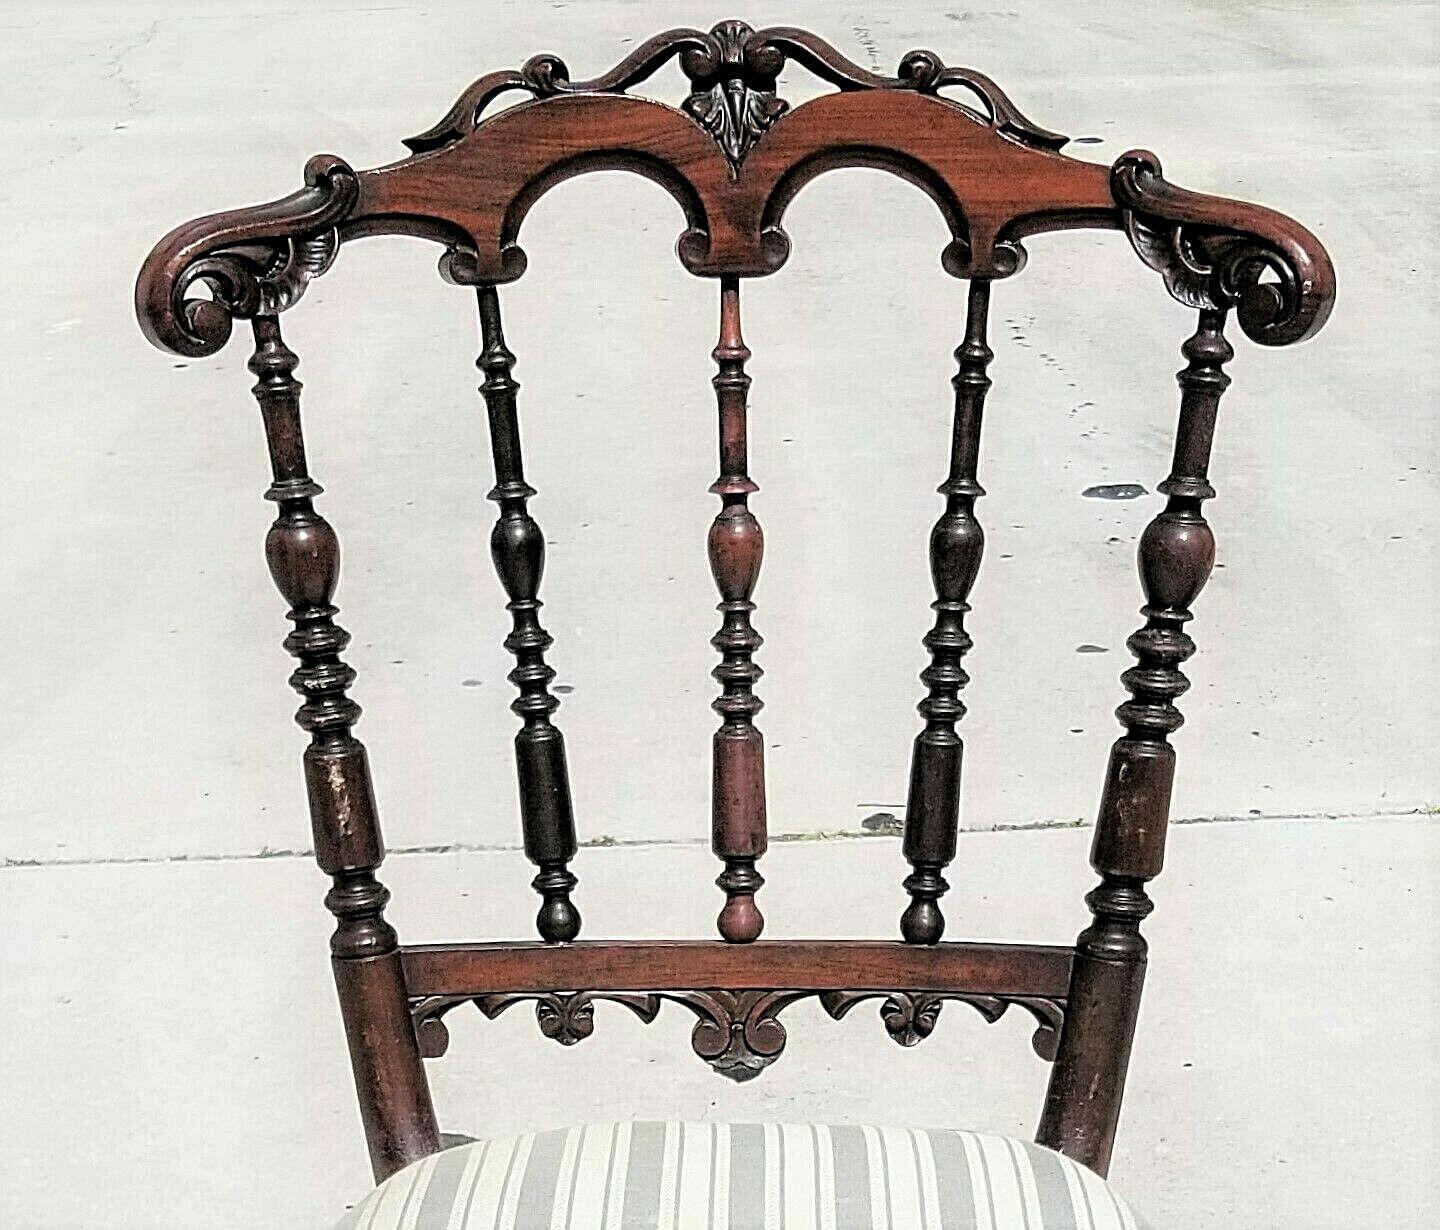 For FULL item description click on CONTINUE READING at the bottom of this page.

Offering one of our recent palm beach estate fine furniture acquisitions of an
antique hand carved chiavari mahogany or walnut petite vanity desk accent dining